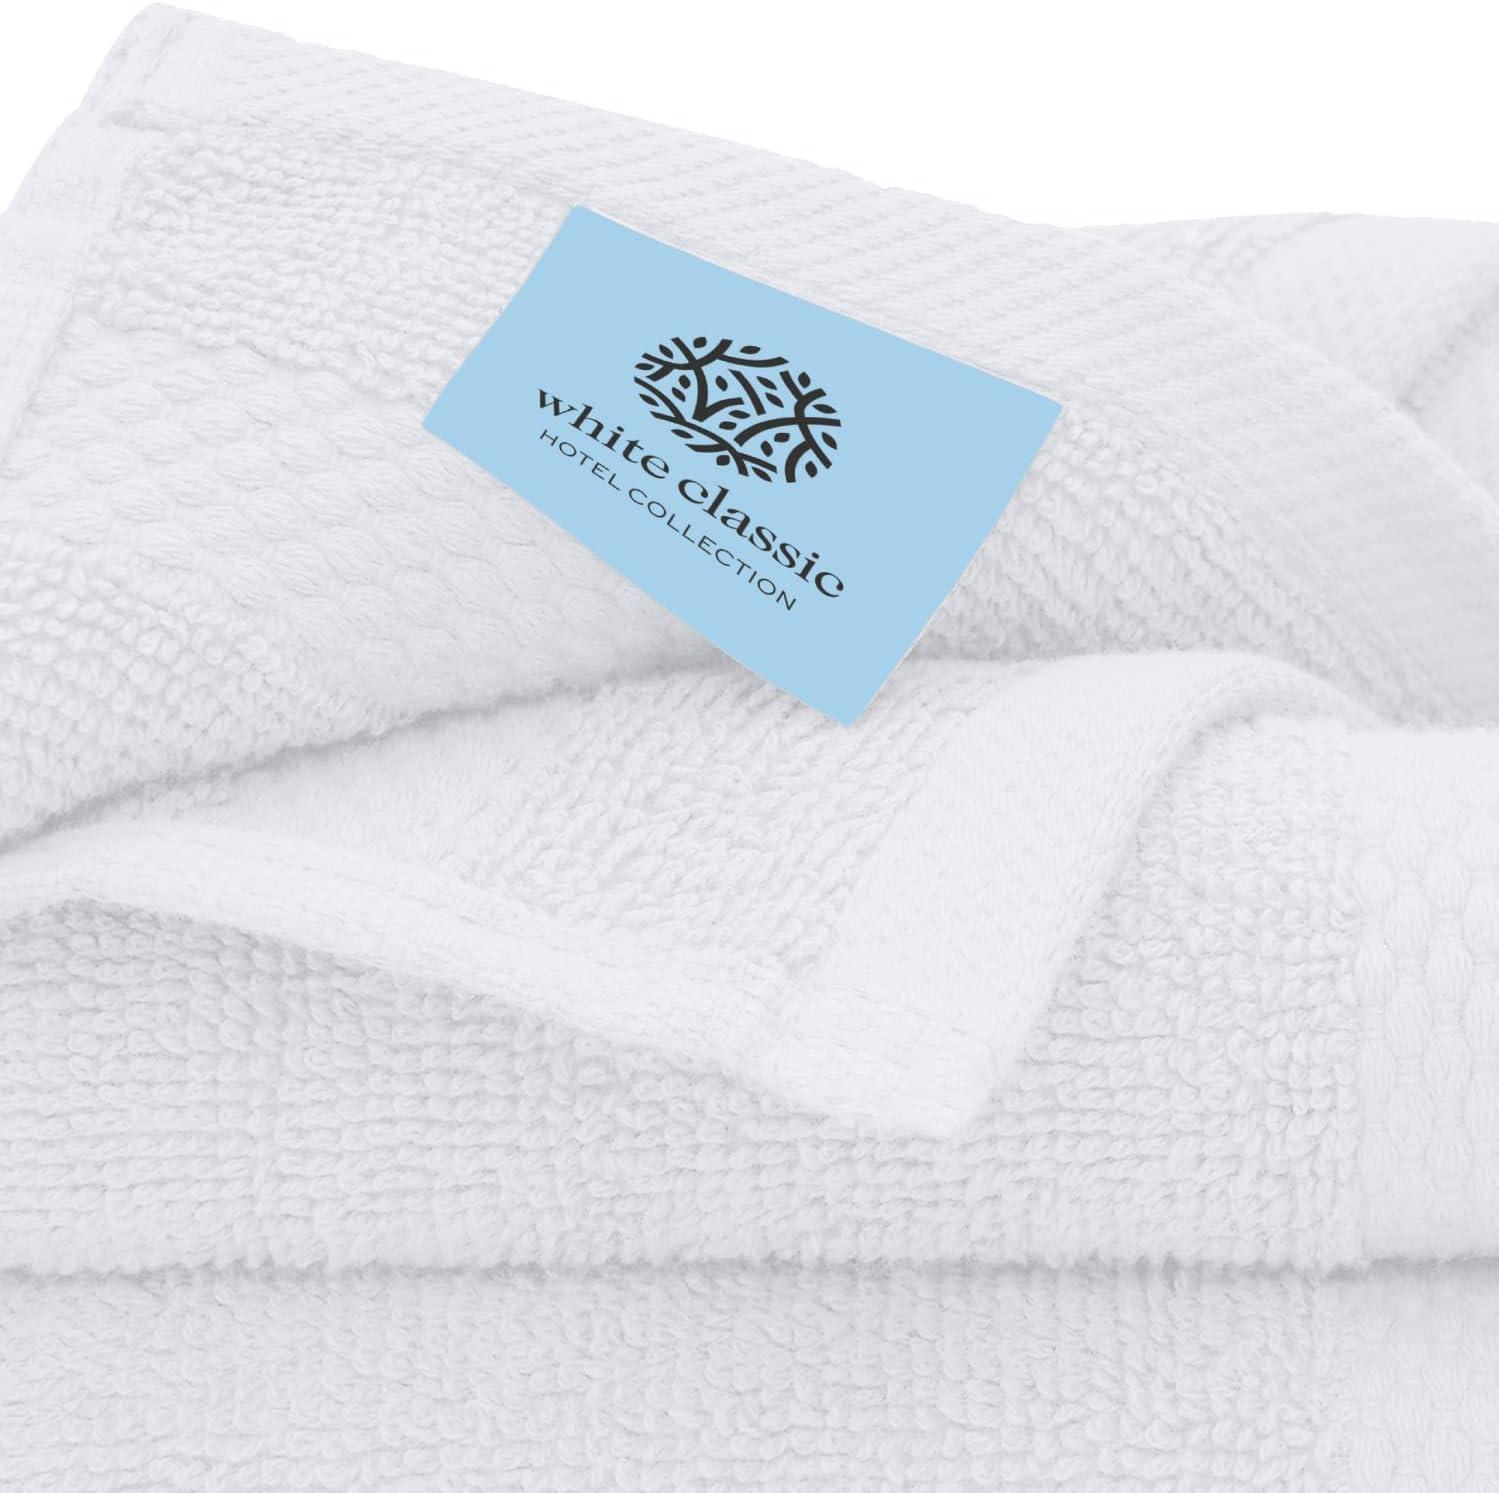 WhiteClassic Luxury Cotton Washcloths - Large Hotel Spa Bathroom Face Towel, 12 Pack